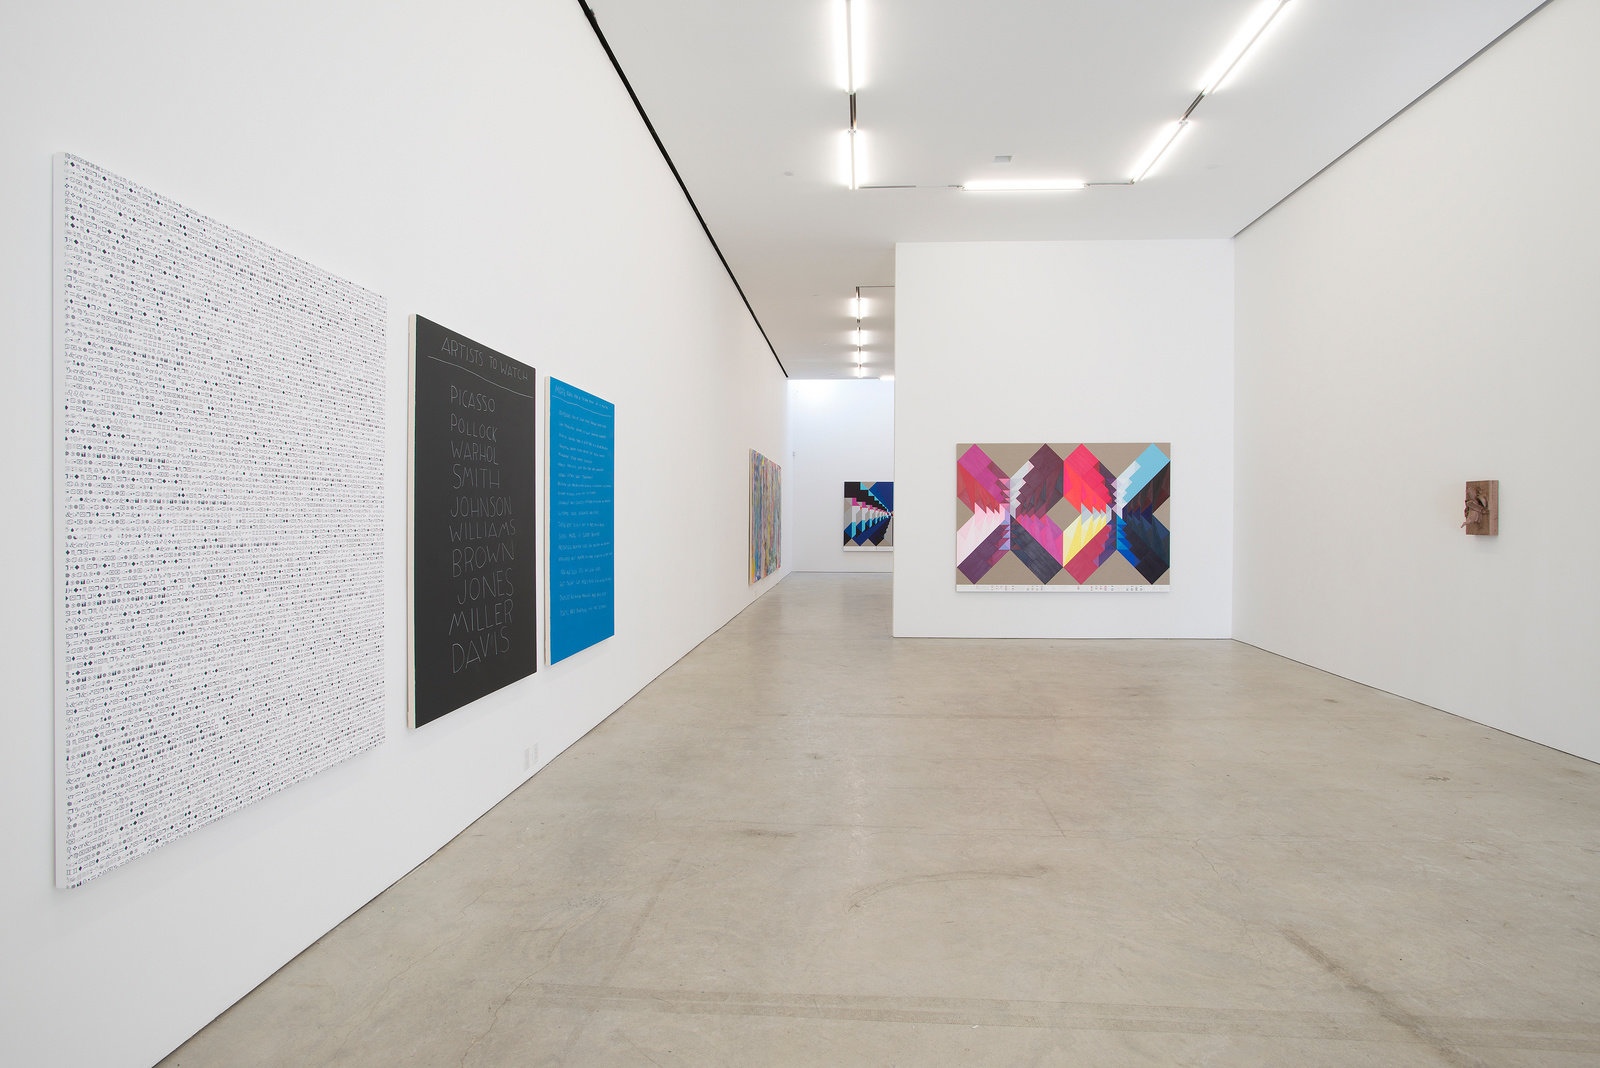 Kuo reeder, installation view 7, it gets beta, 2015 photo credit bill orcutt